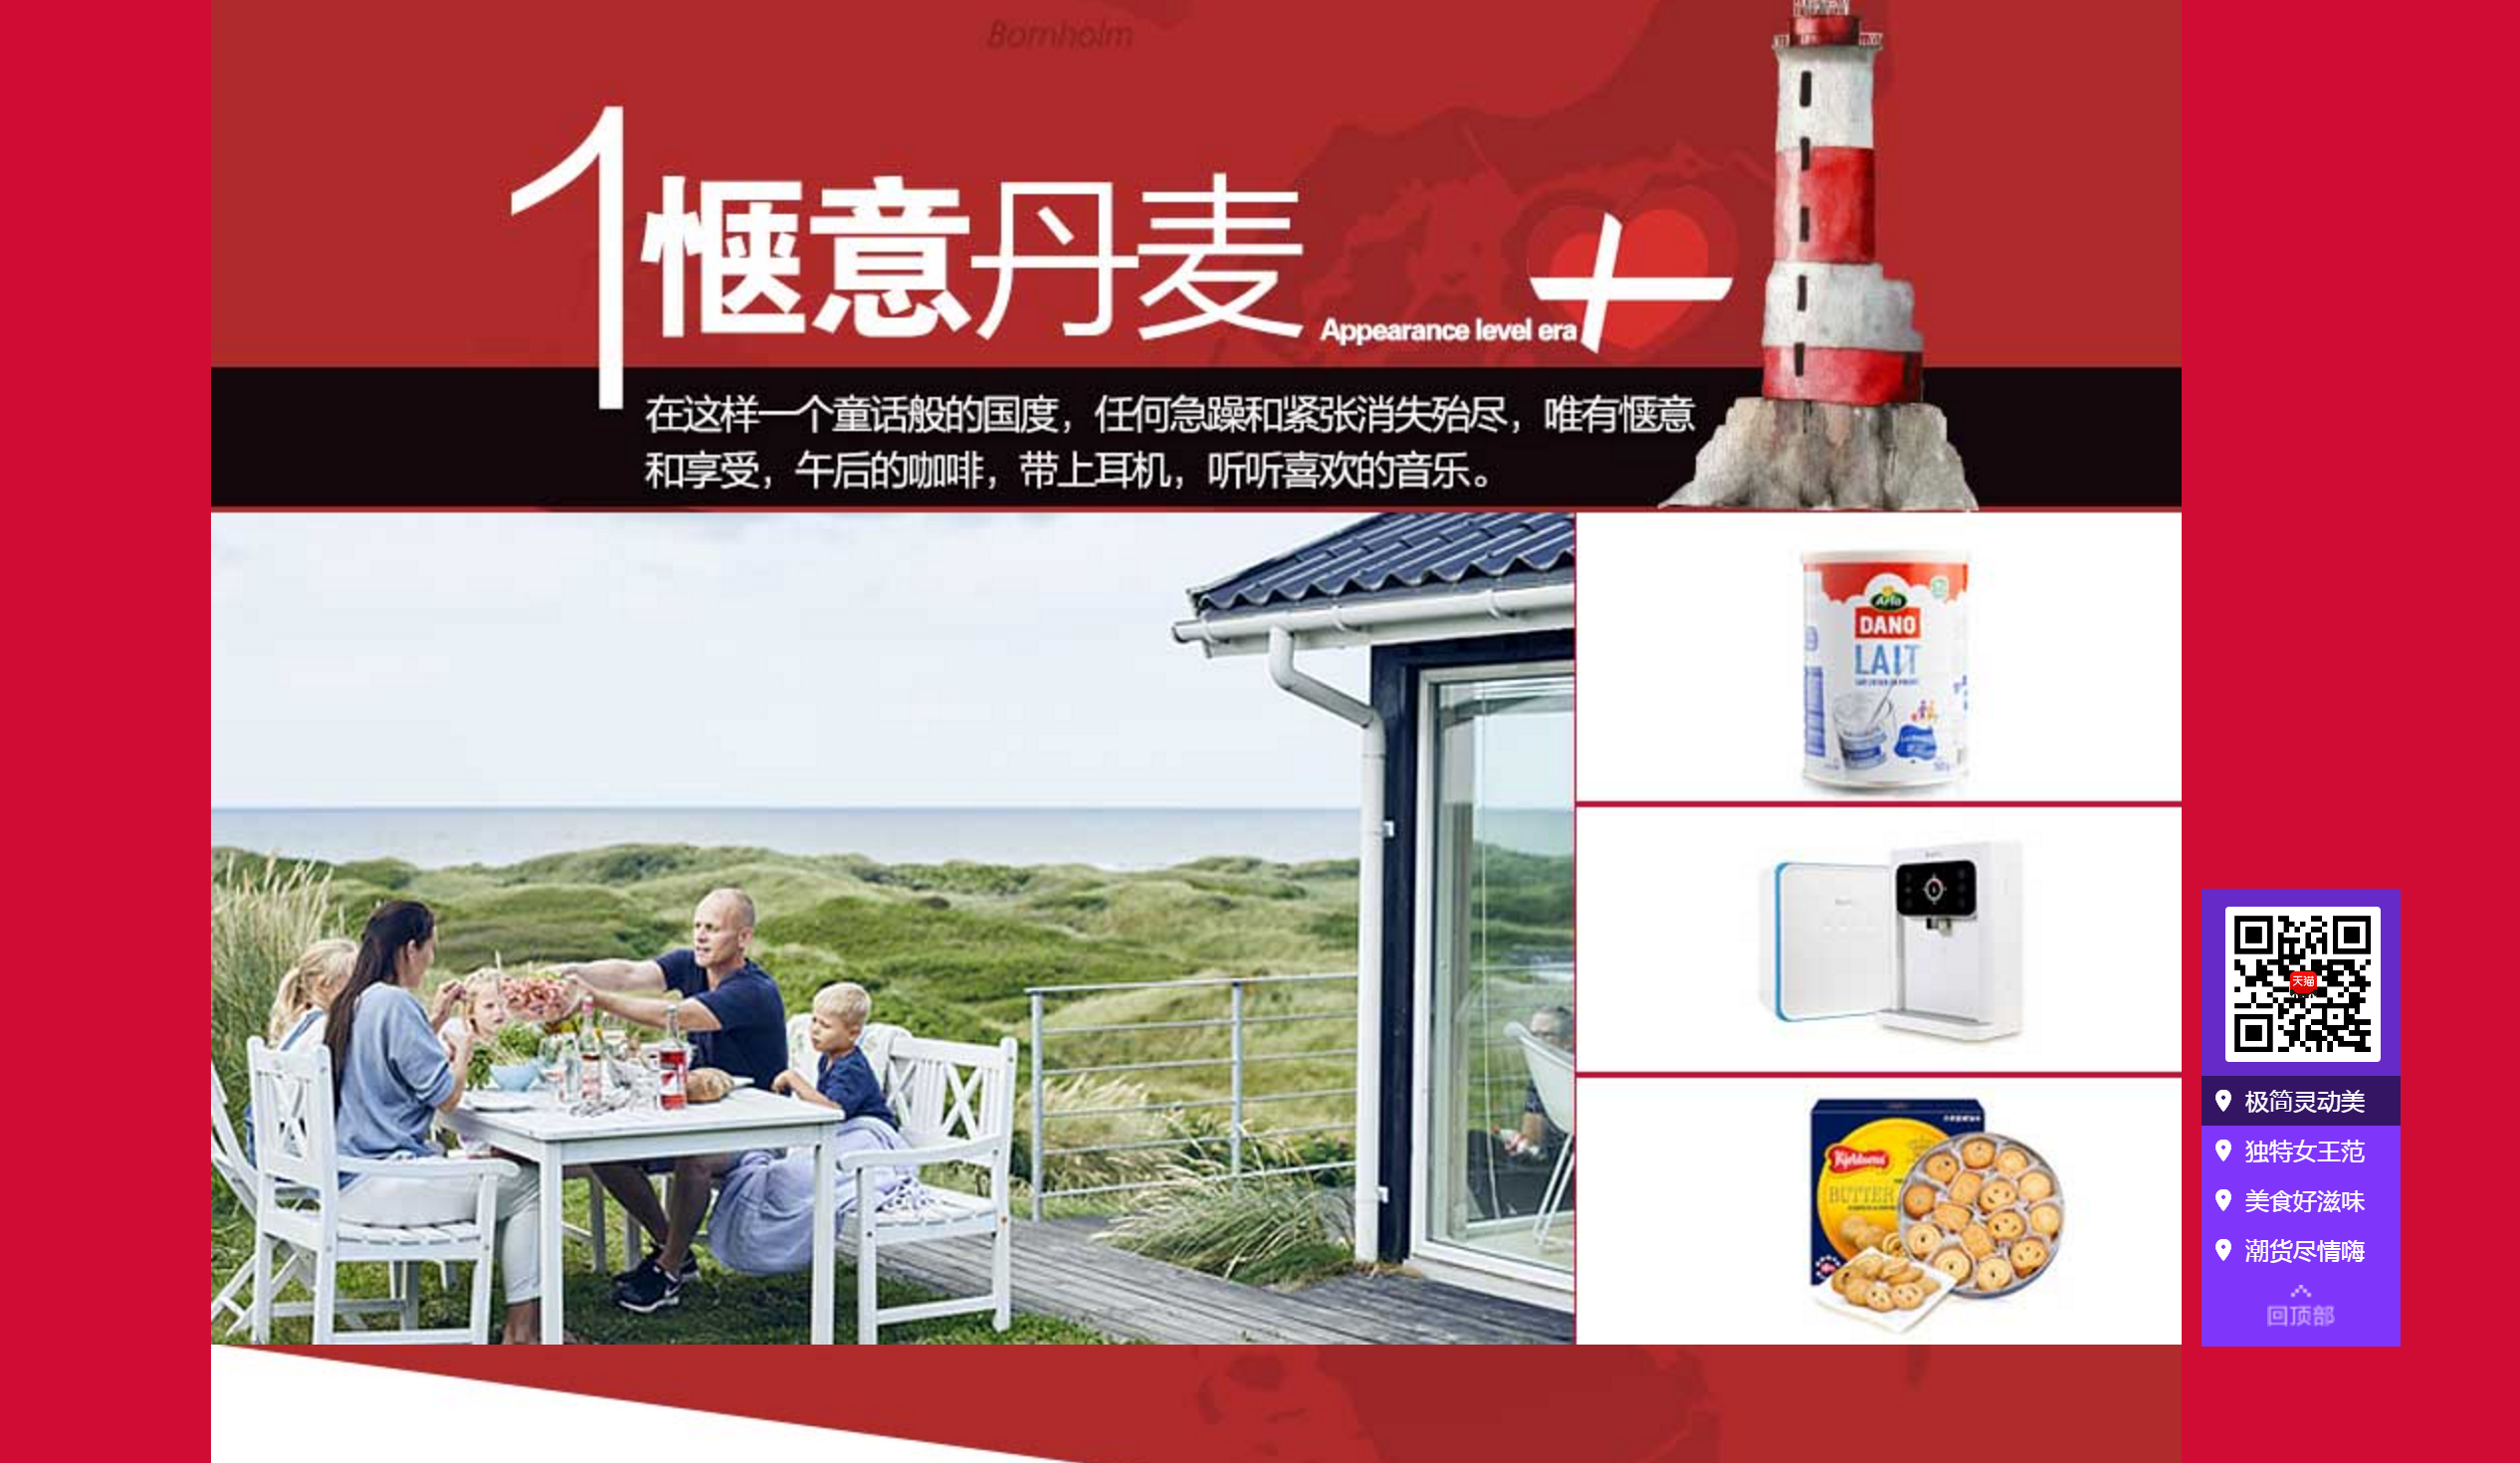 Earlier this month, Alibaba launched a Danish Pavilion on Tmall, connecting 21 Danish brands with 440 million Chinese consumers.